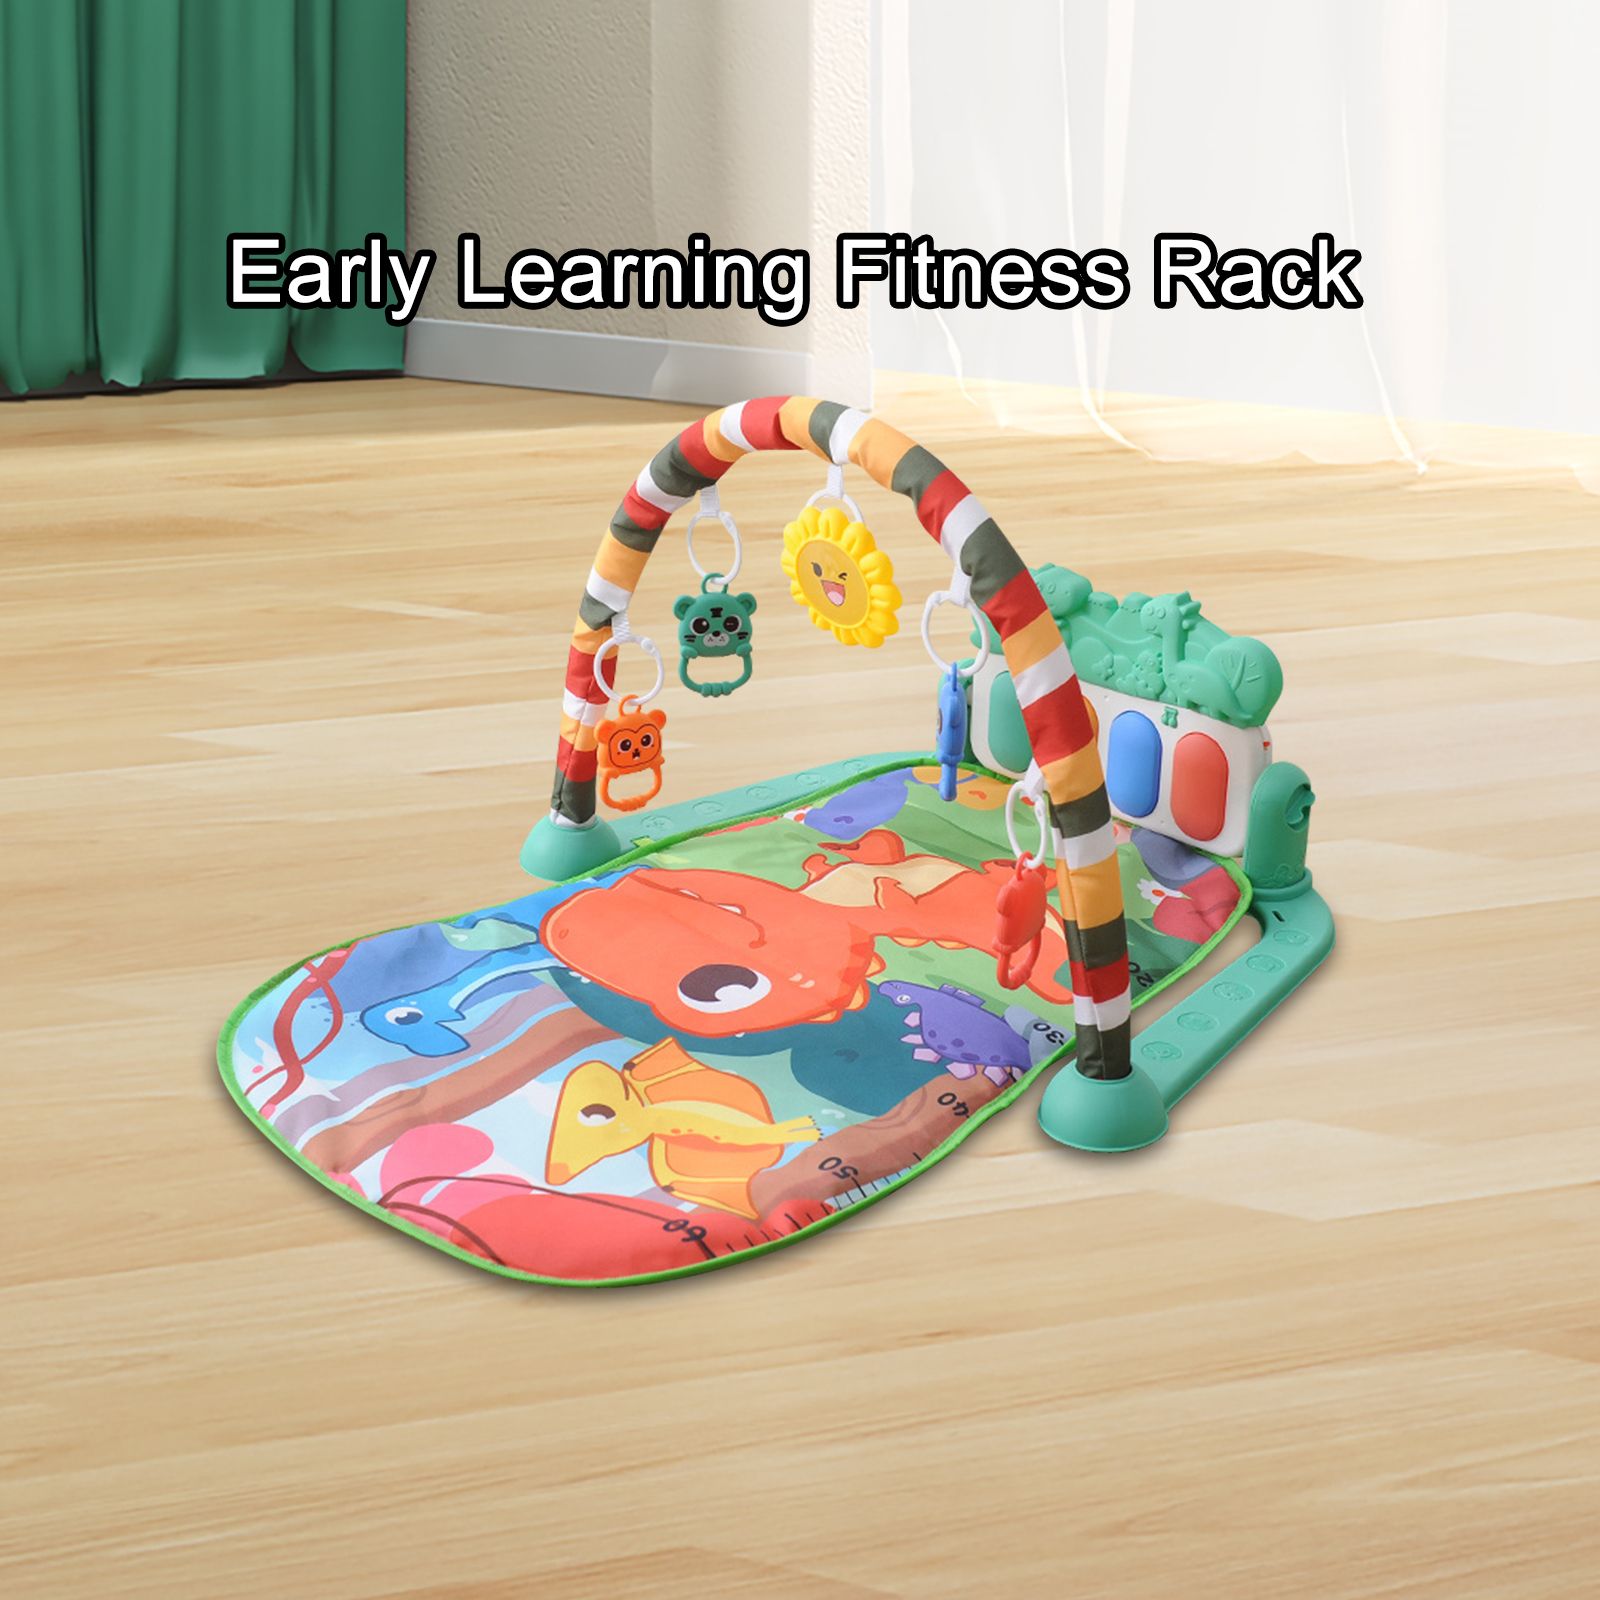 

Newborn Early Education Sound-Producing and Washable Fitness Foot Piano